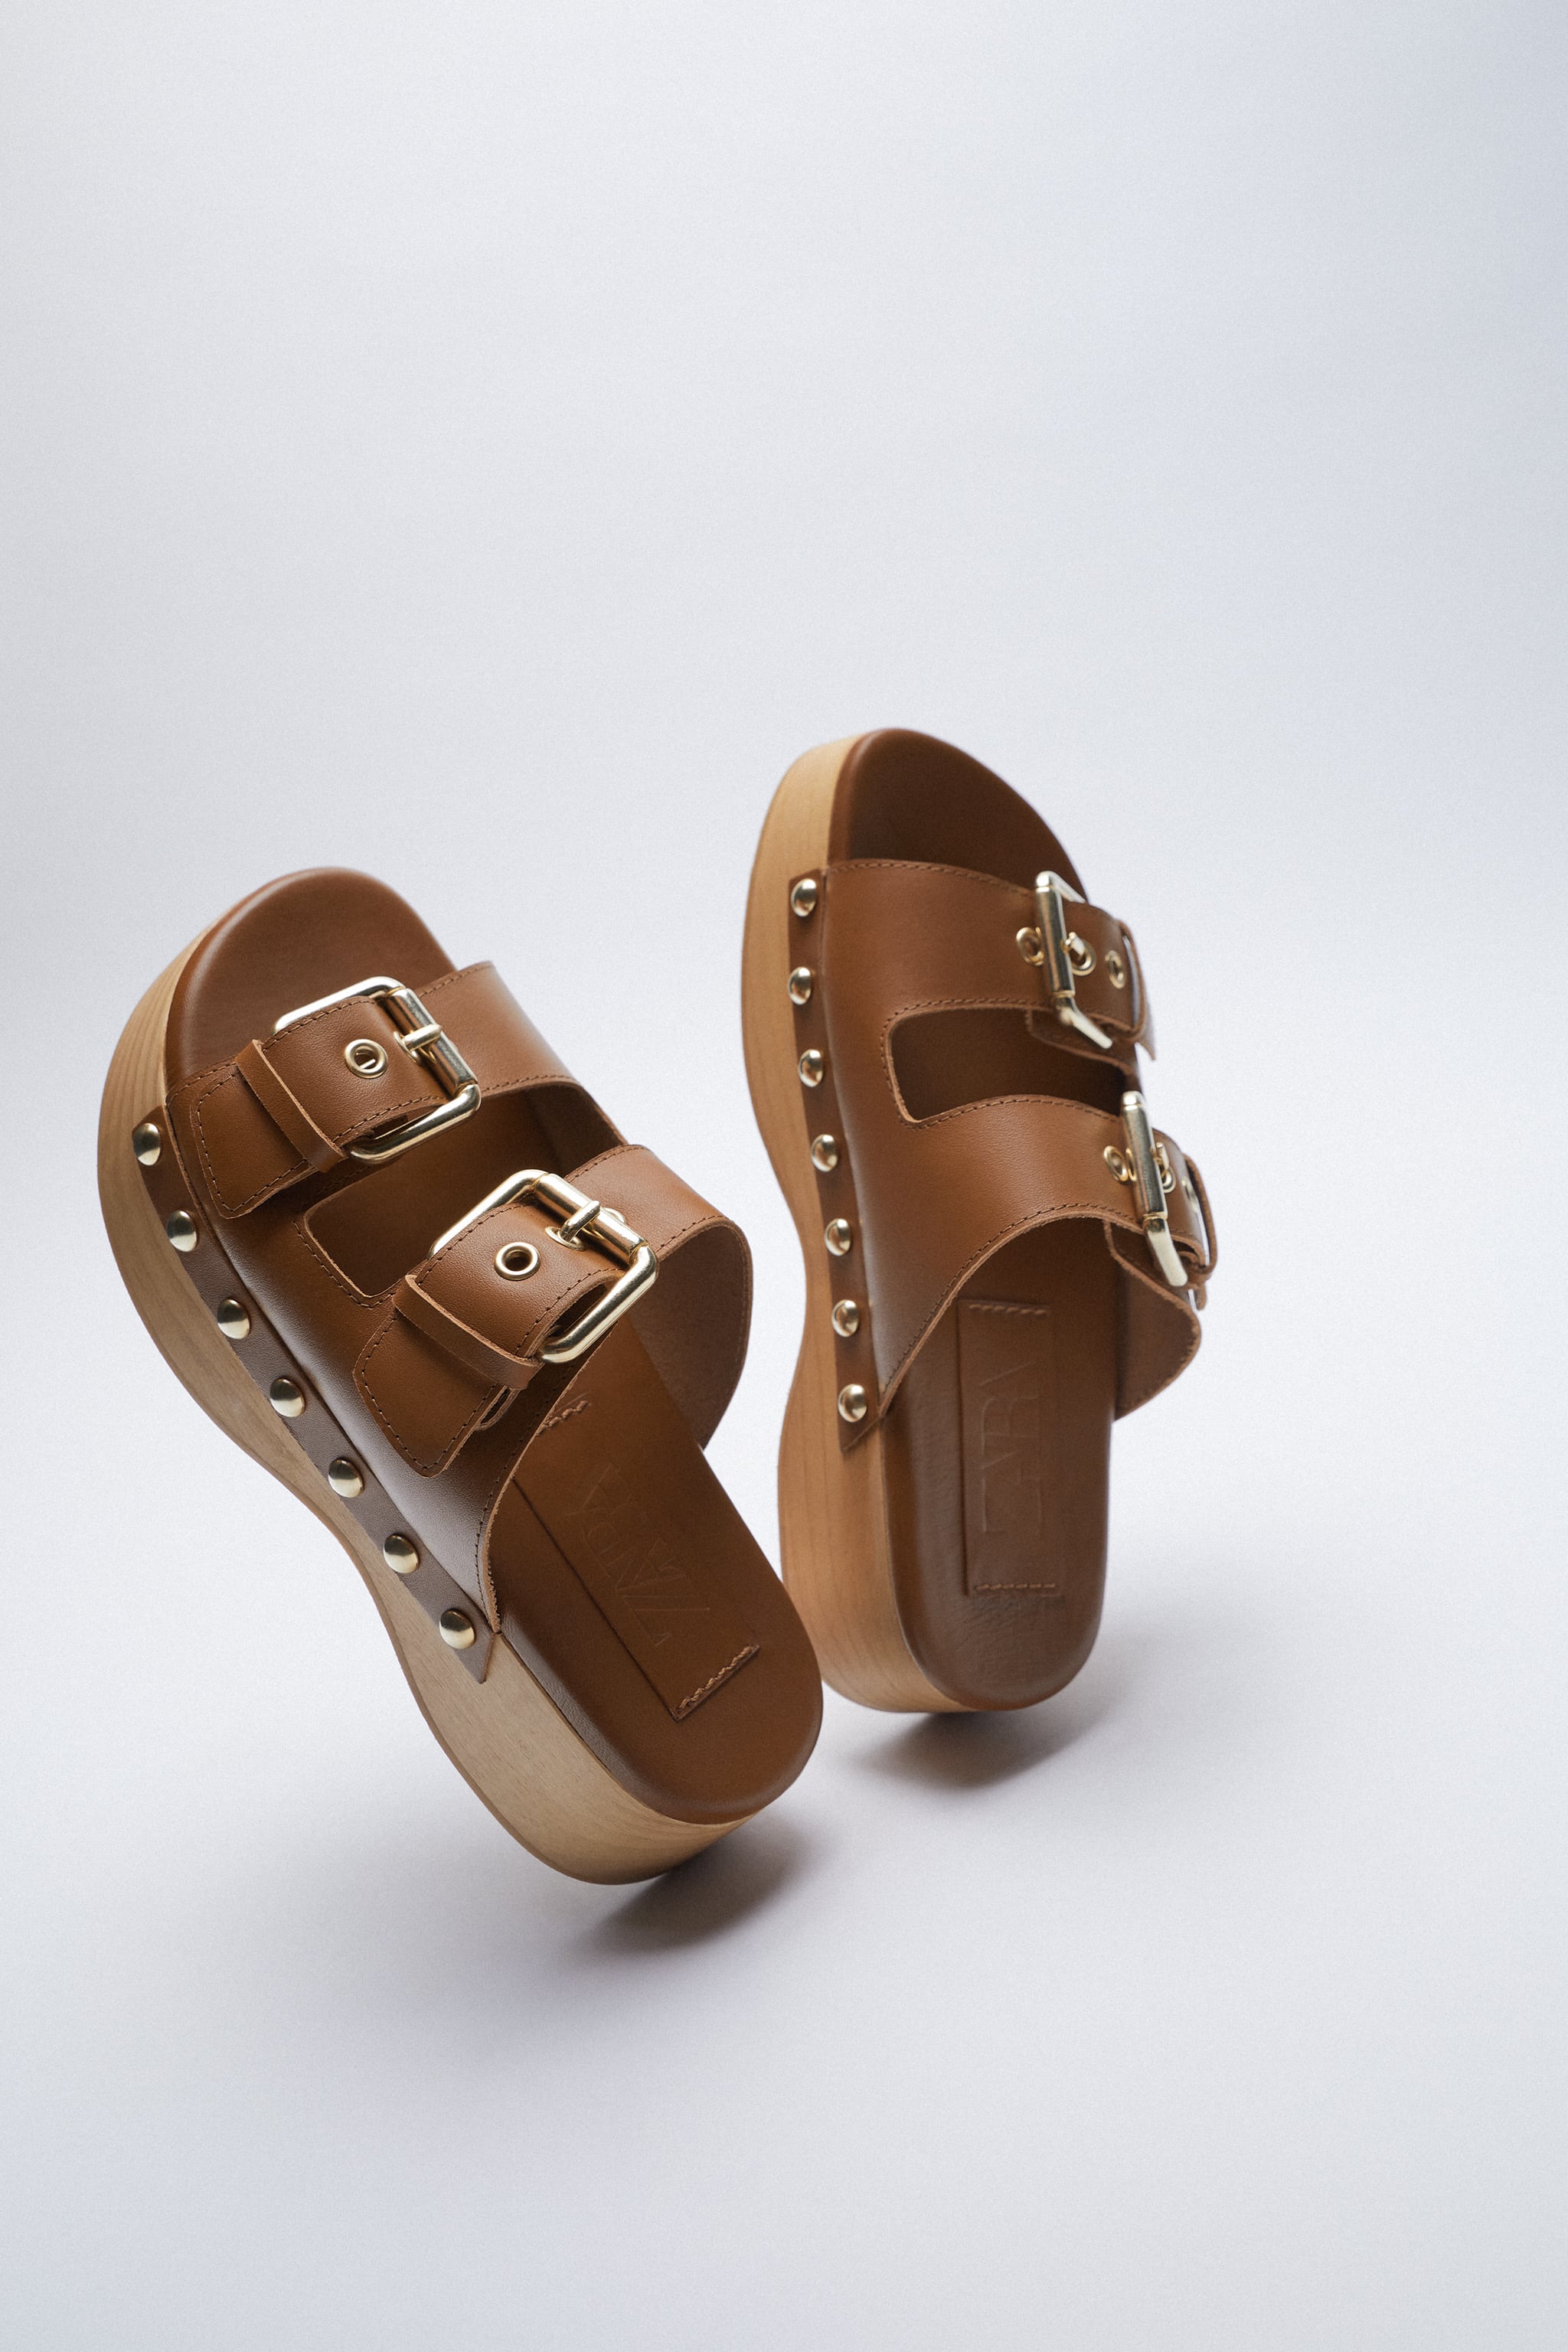 Tan buckled leather blogs with straps and gold studs from Zara